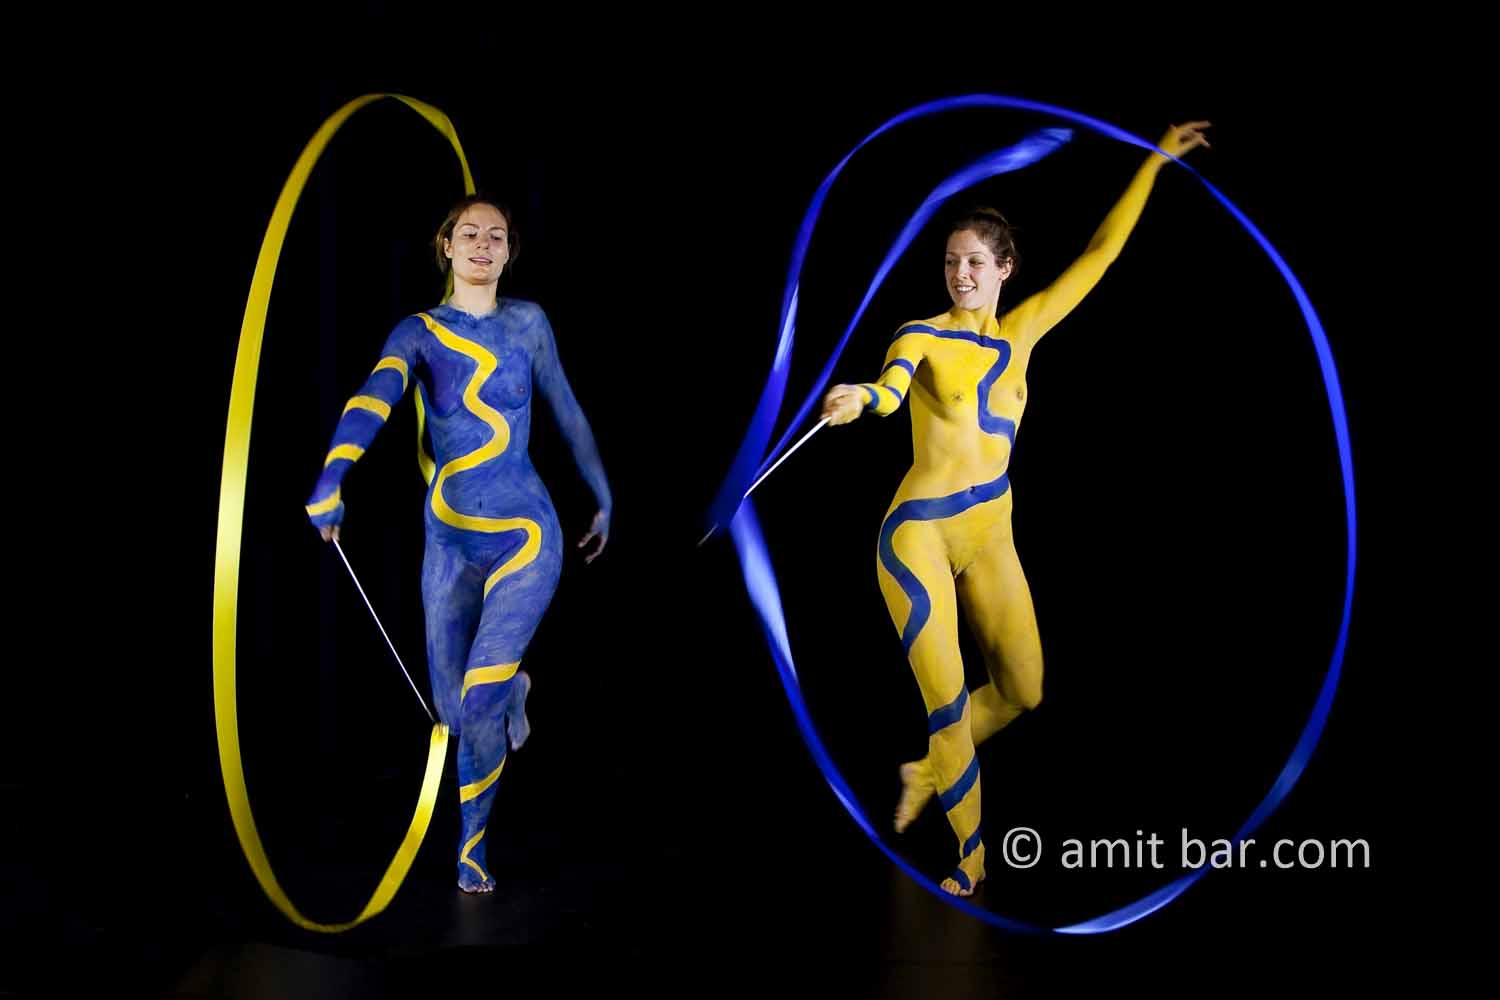 Two ribbons I: body-painted dancers with ribbons